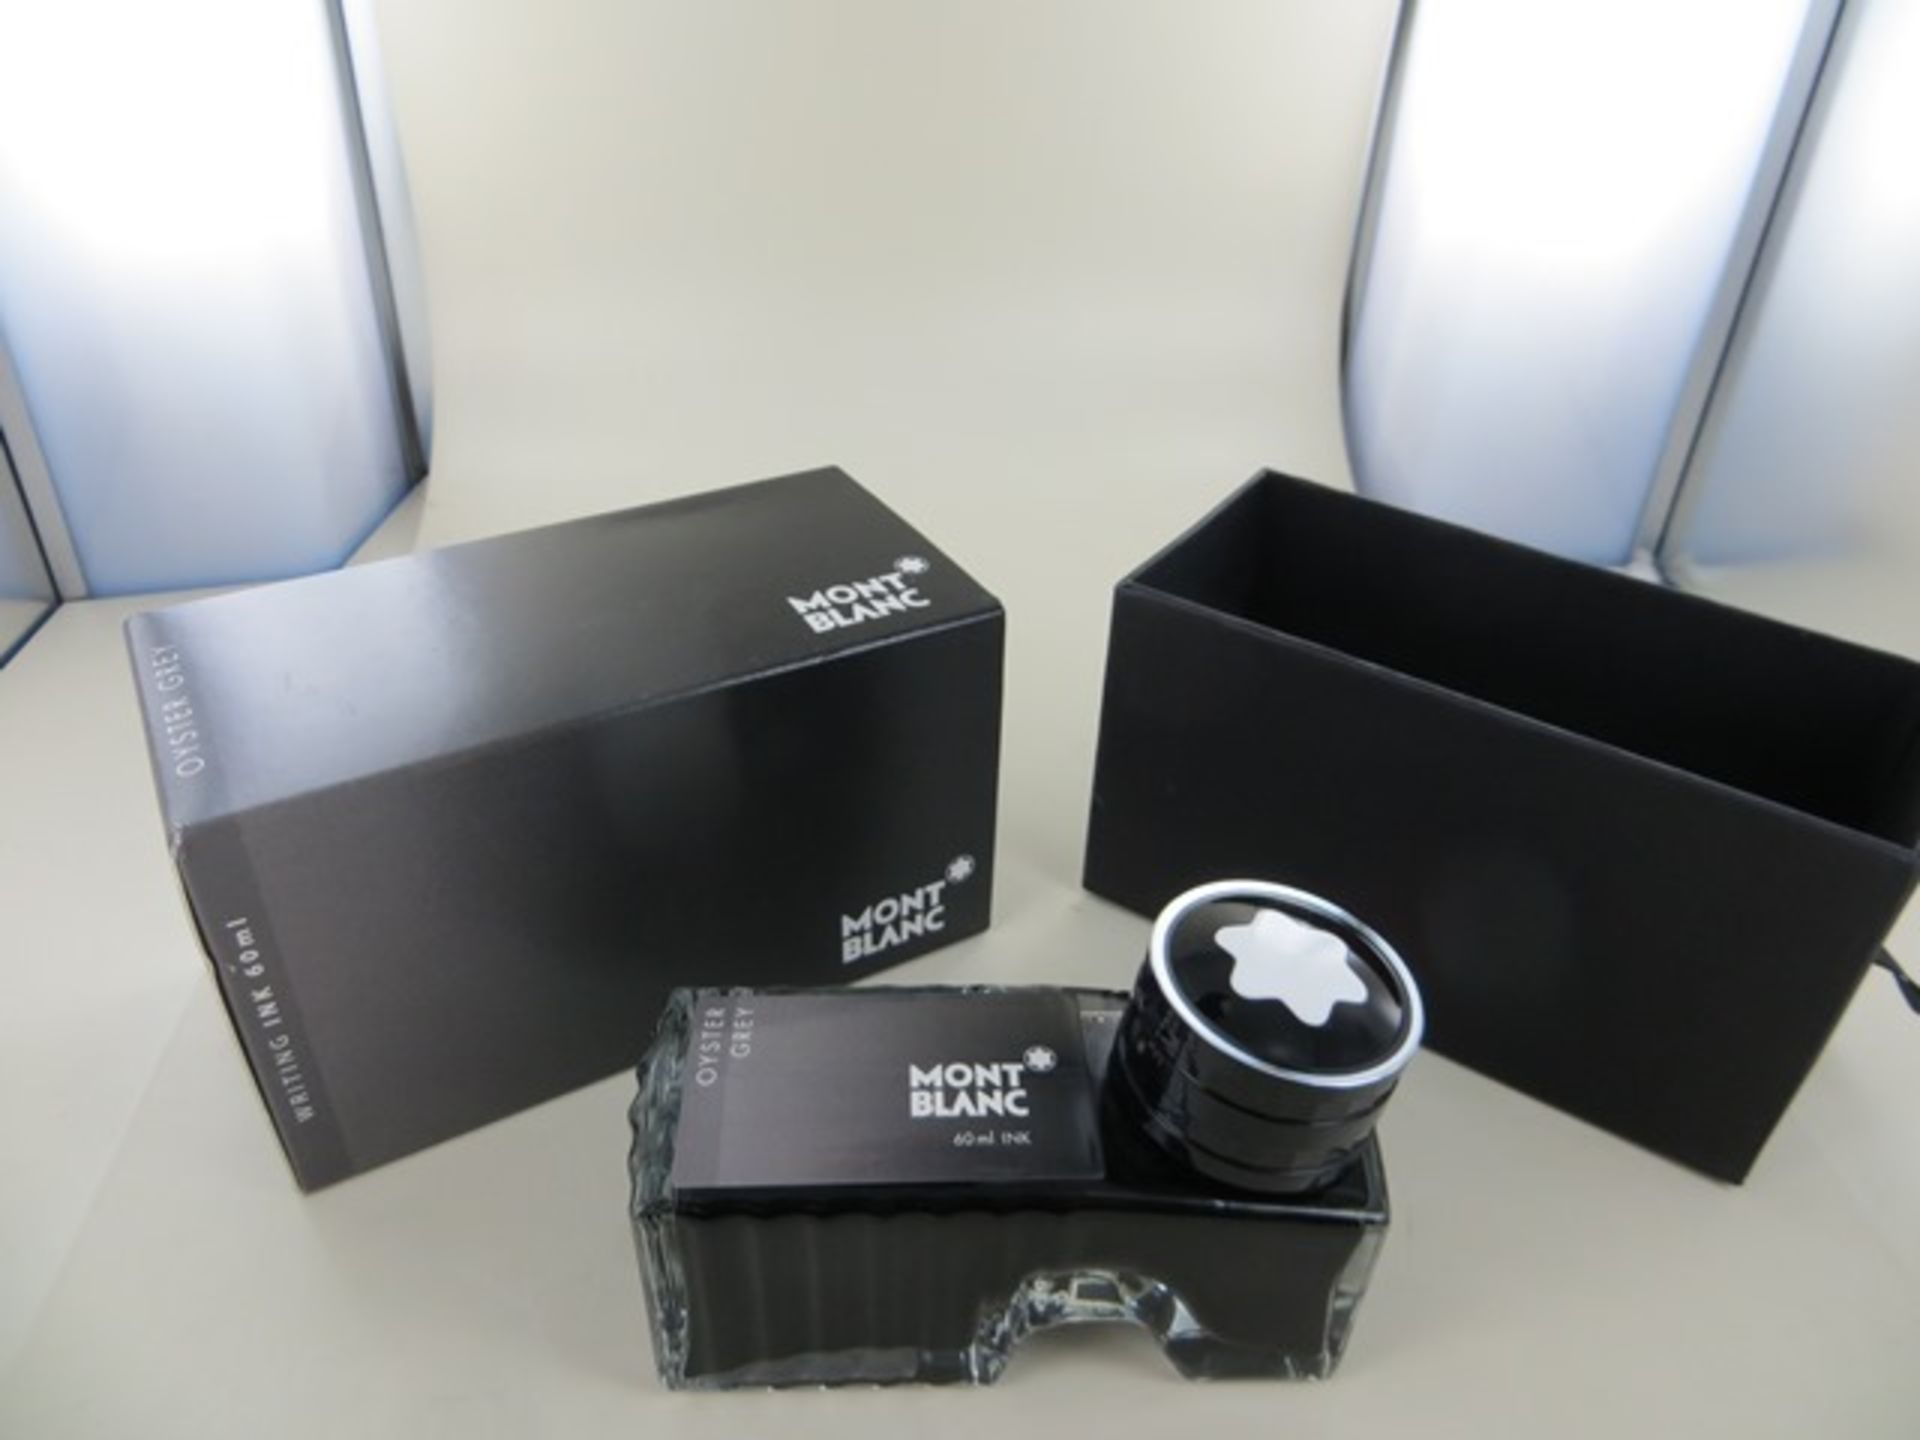 Four Montblanc Ink Bottles Oyster Grey 60ml Art No 105186 RRP £16 each. Please note: This lot will